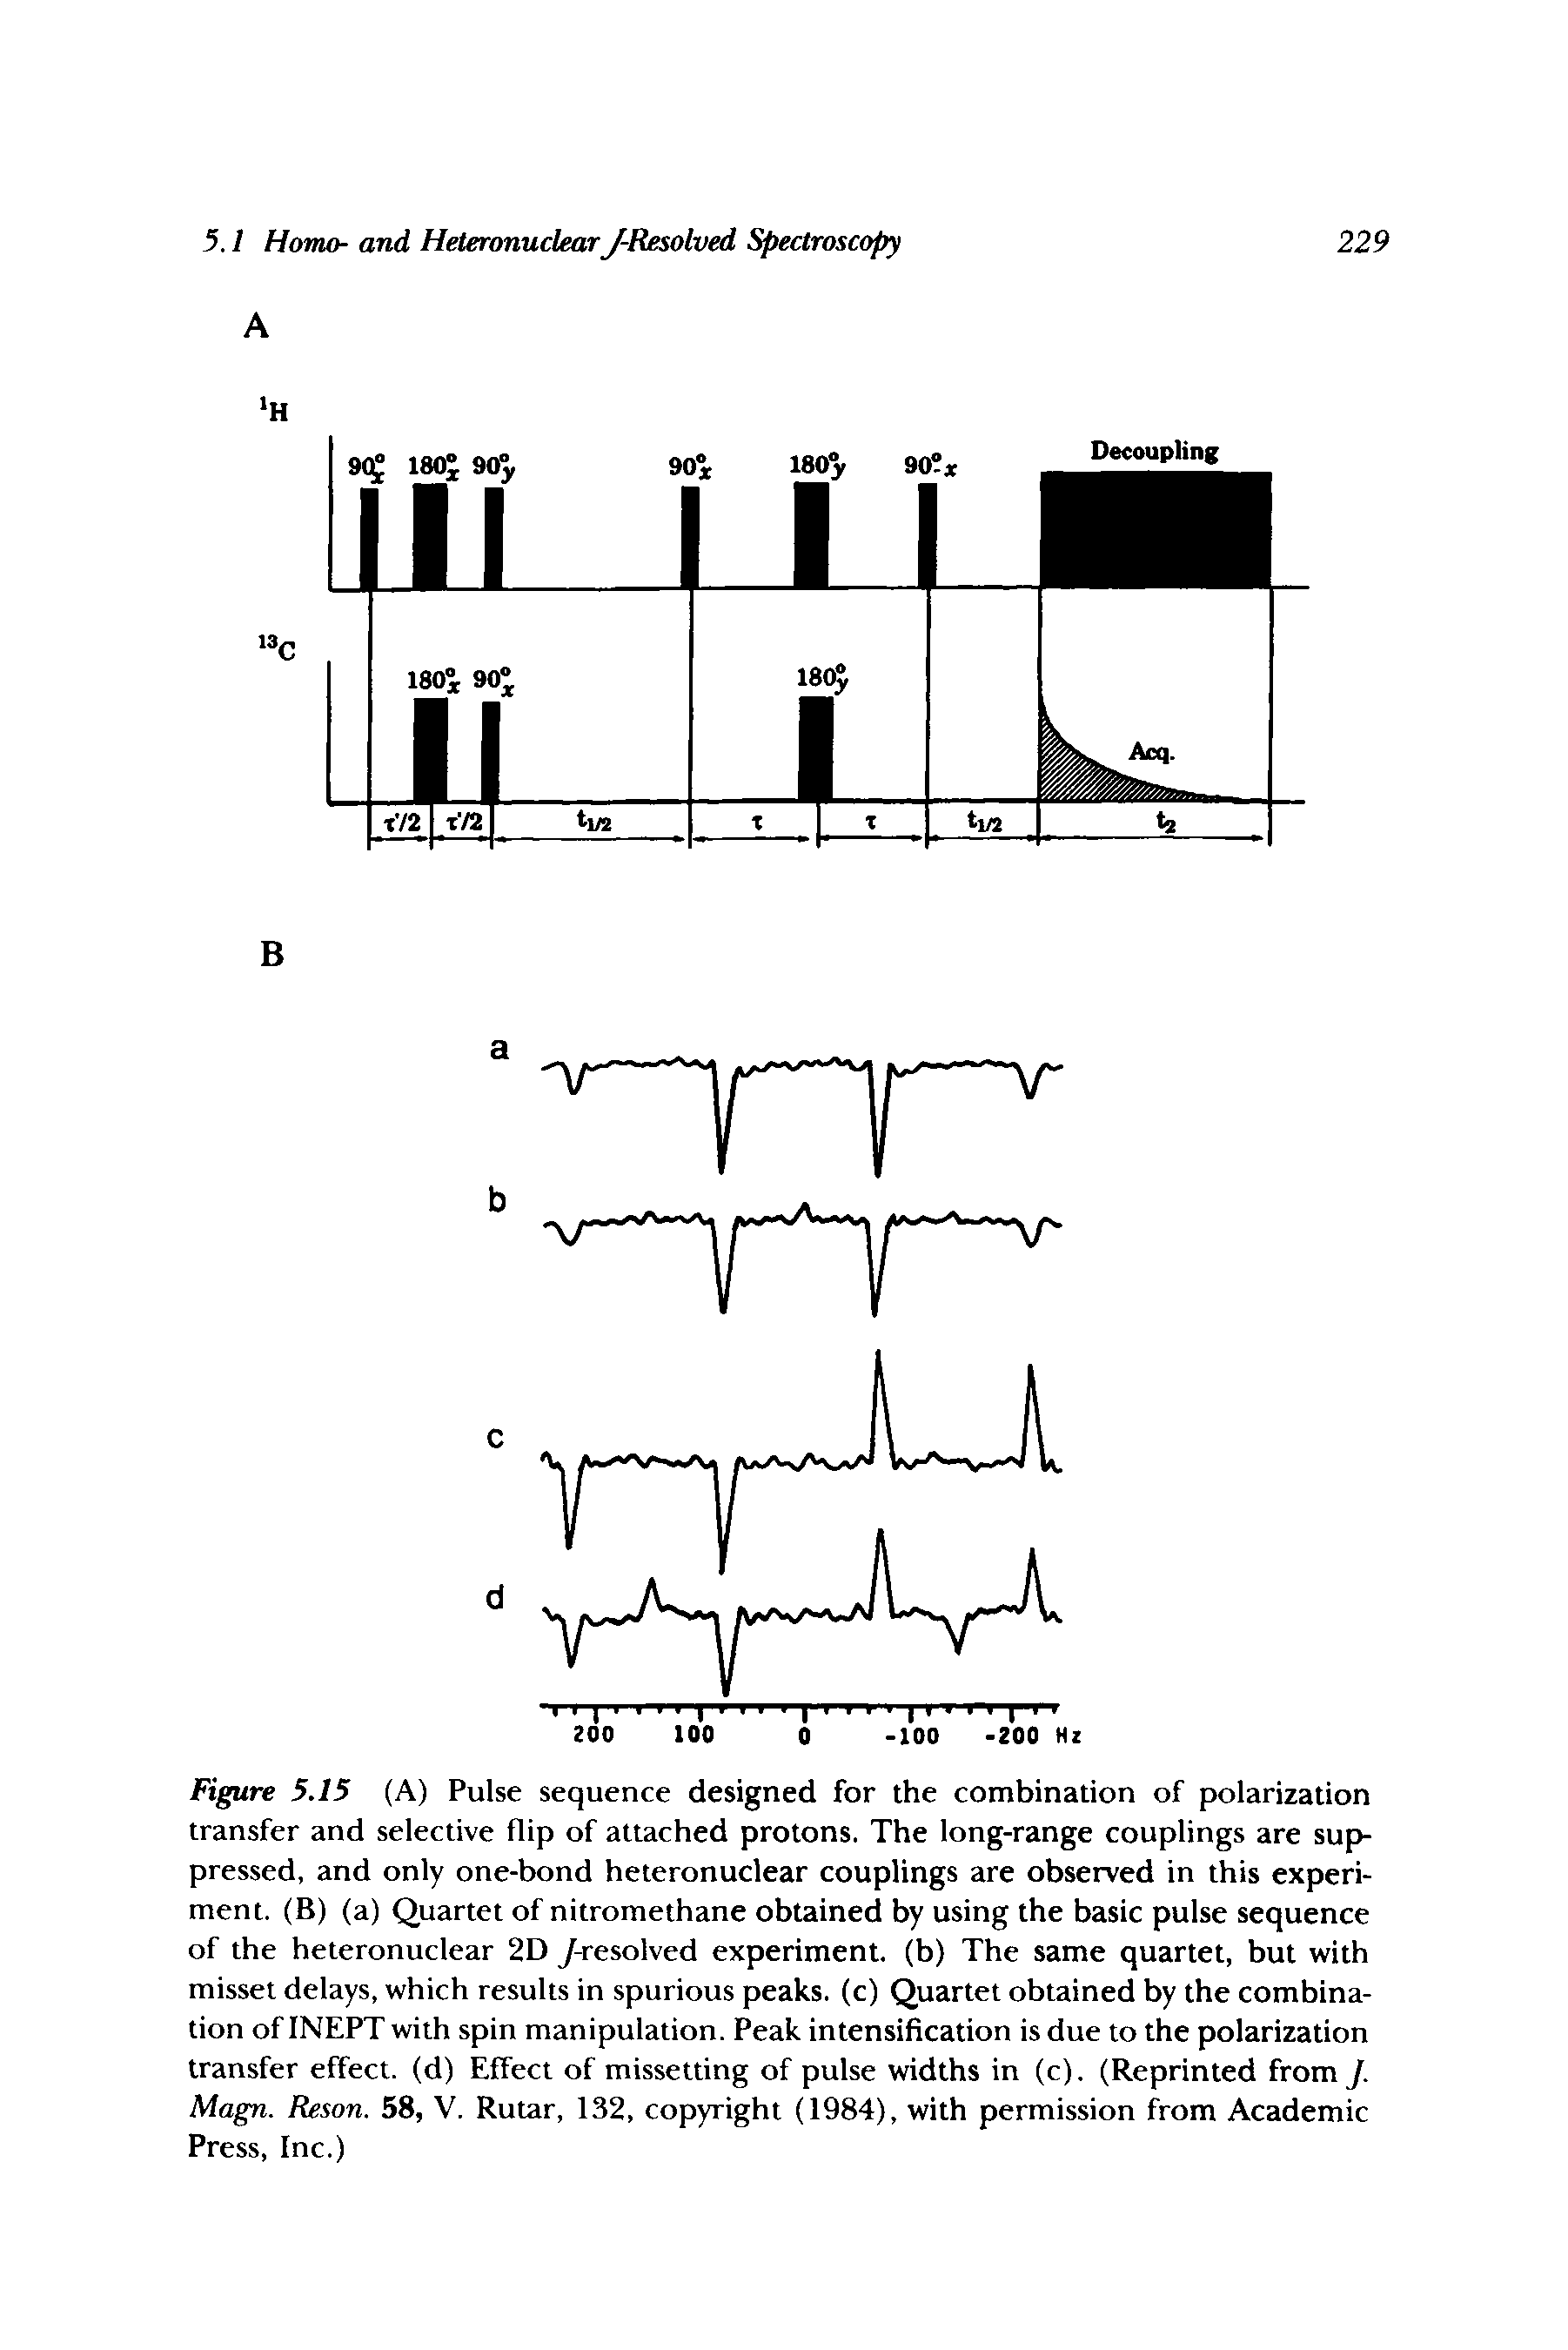 Figure 5.15 (A) Pulse sequence designed for the combination of polarization transfer and selective flip of attached protons. The long-range couplings are suppressed, and only one-bond heteronuclear couplings are observed in this experiment. (B) (a) Quartet of nitromethane obtained by using the basic pulse sequence of the heteronuclear 2D /-resolved experiment, (b) The same quartet, but with misset delays, which results in spurious peaks, (c) Quartet obtained by the combination of INEPT with spin manipulation. Peak intensification is due to the polarization transfer effect, (d) Effect of missetting of pulse widths in (c). (Reprinted from ]. Magn. Reson. 58, V. Rutar, 132, copyright (1984), with permission from Academic Press, Inc.)...